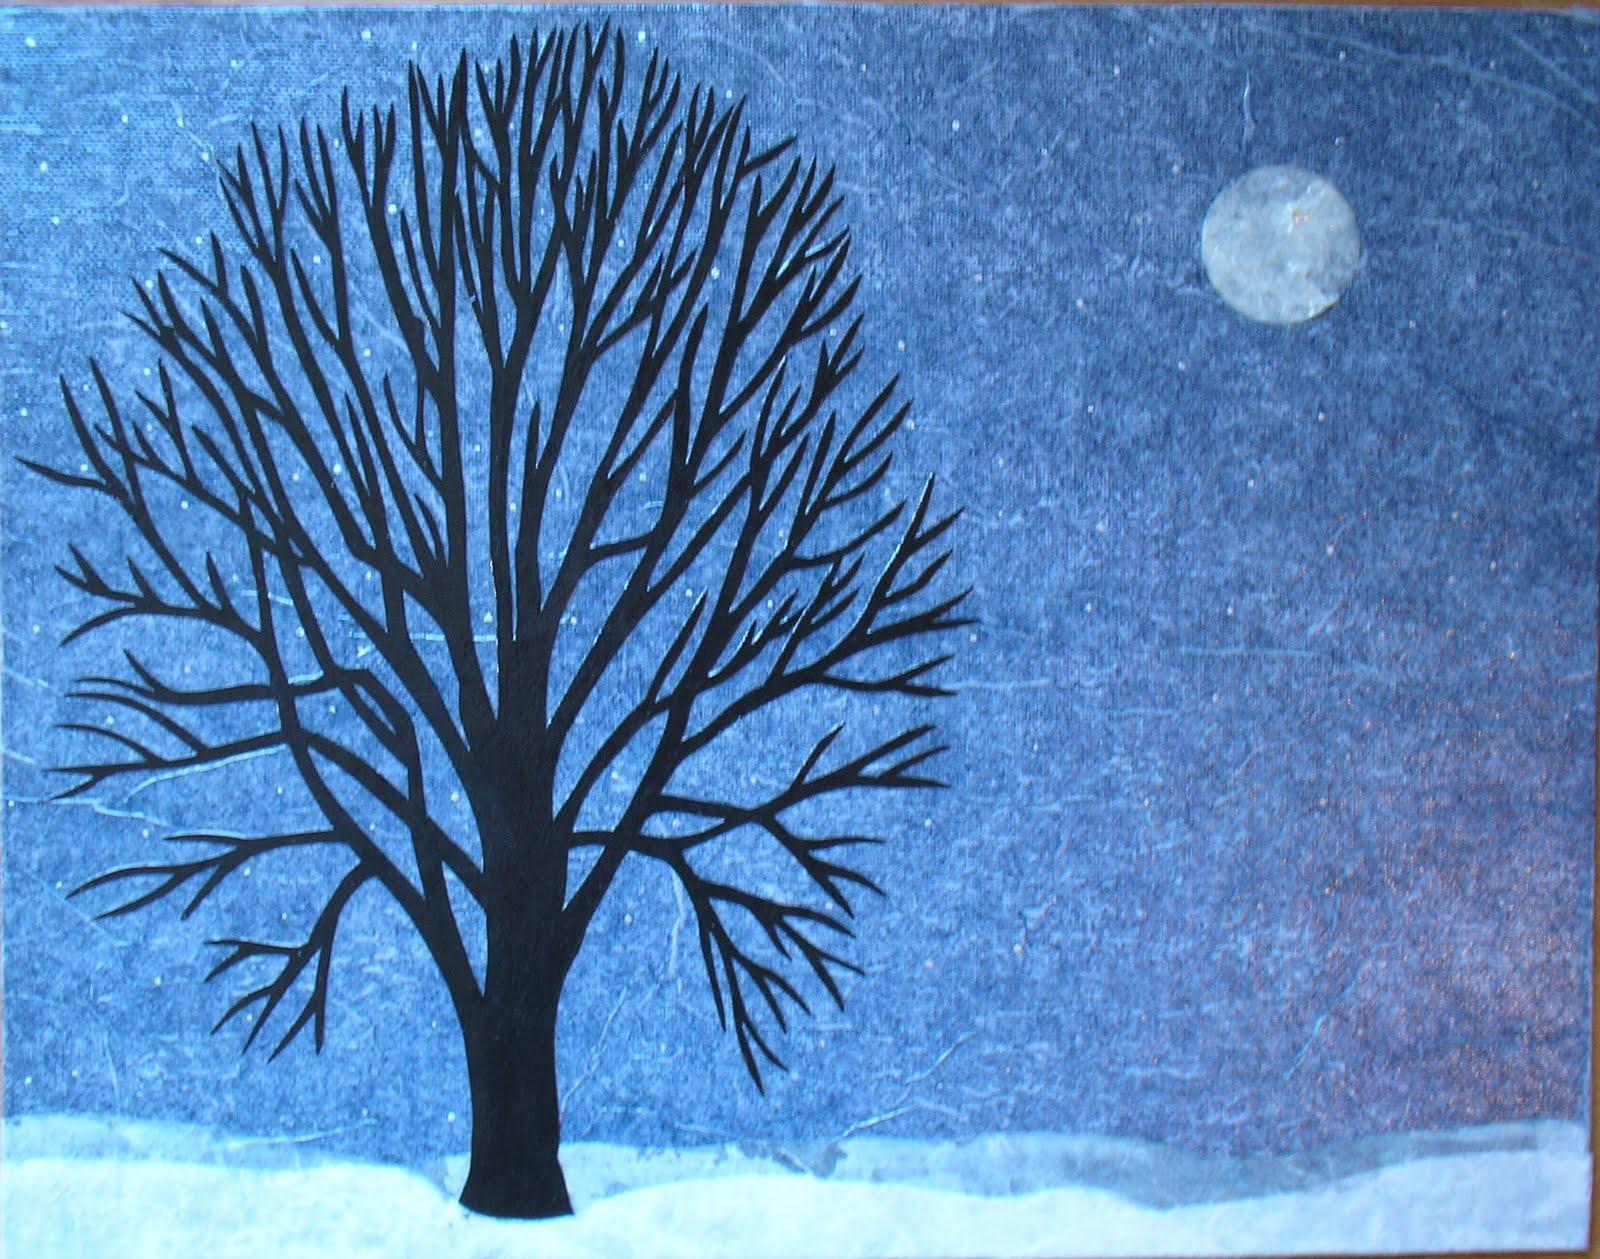 Paper Creations by Shaina Otto: My first Winter Scenes